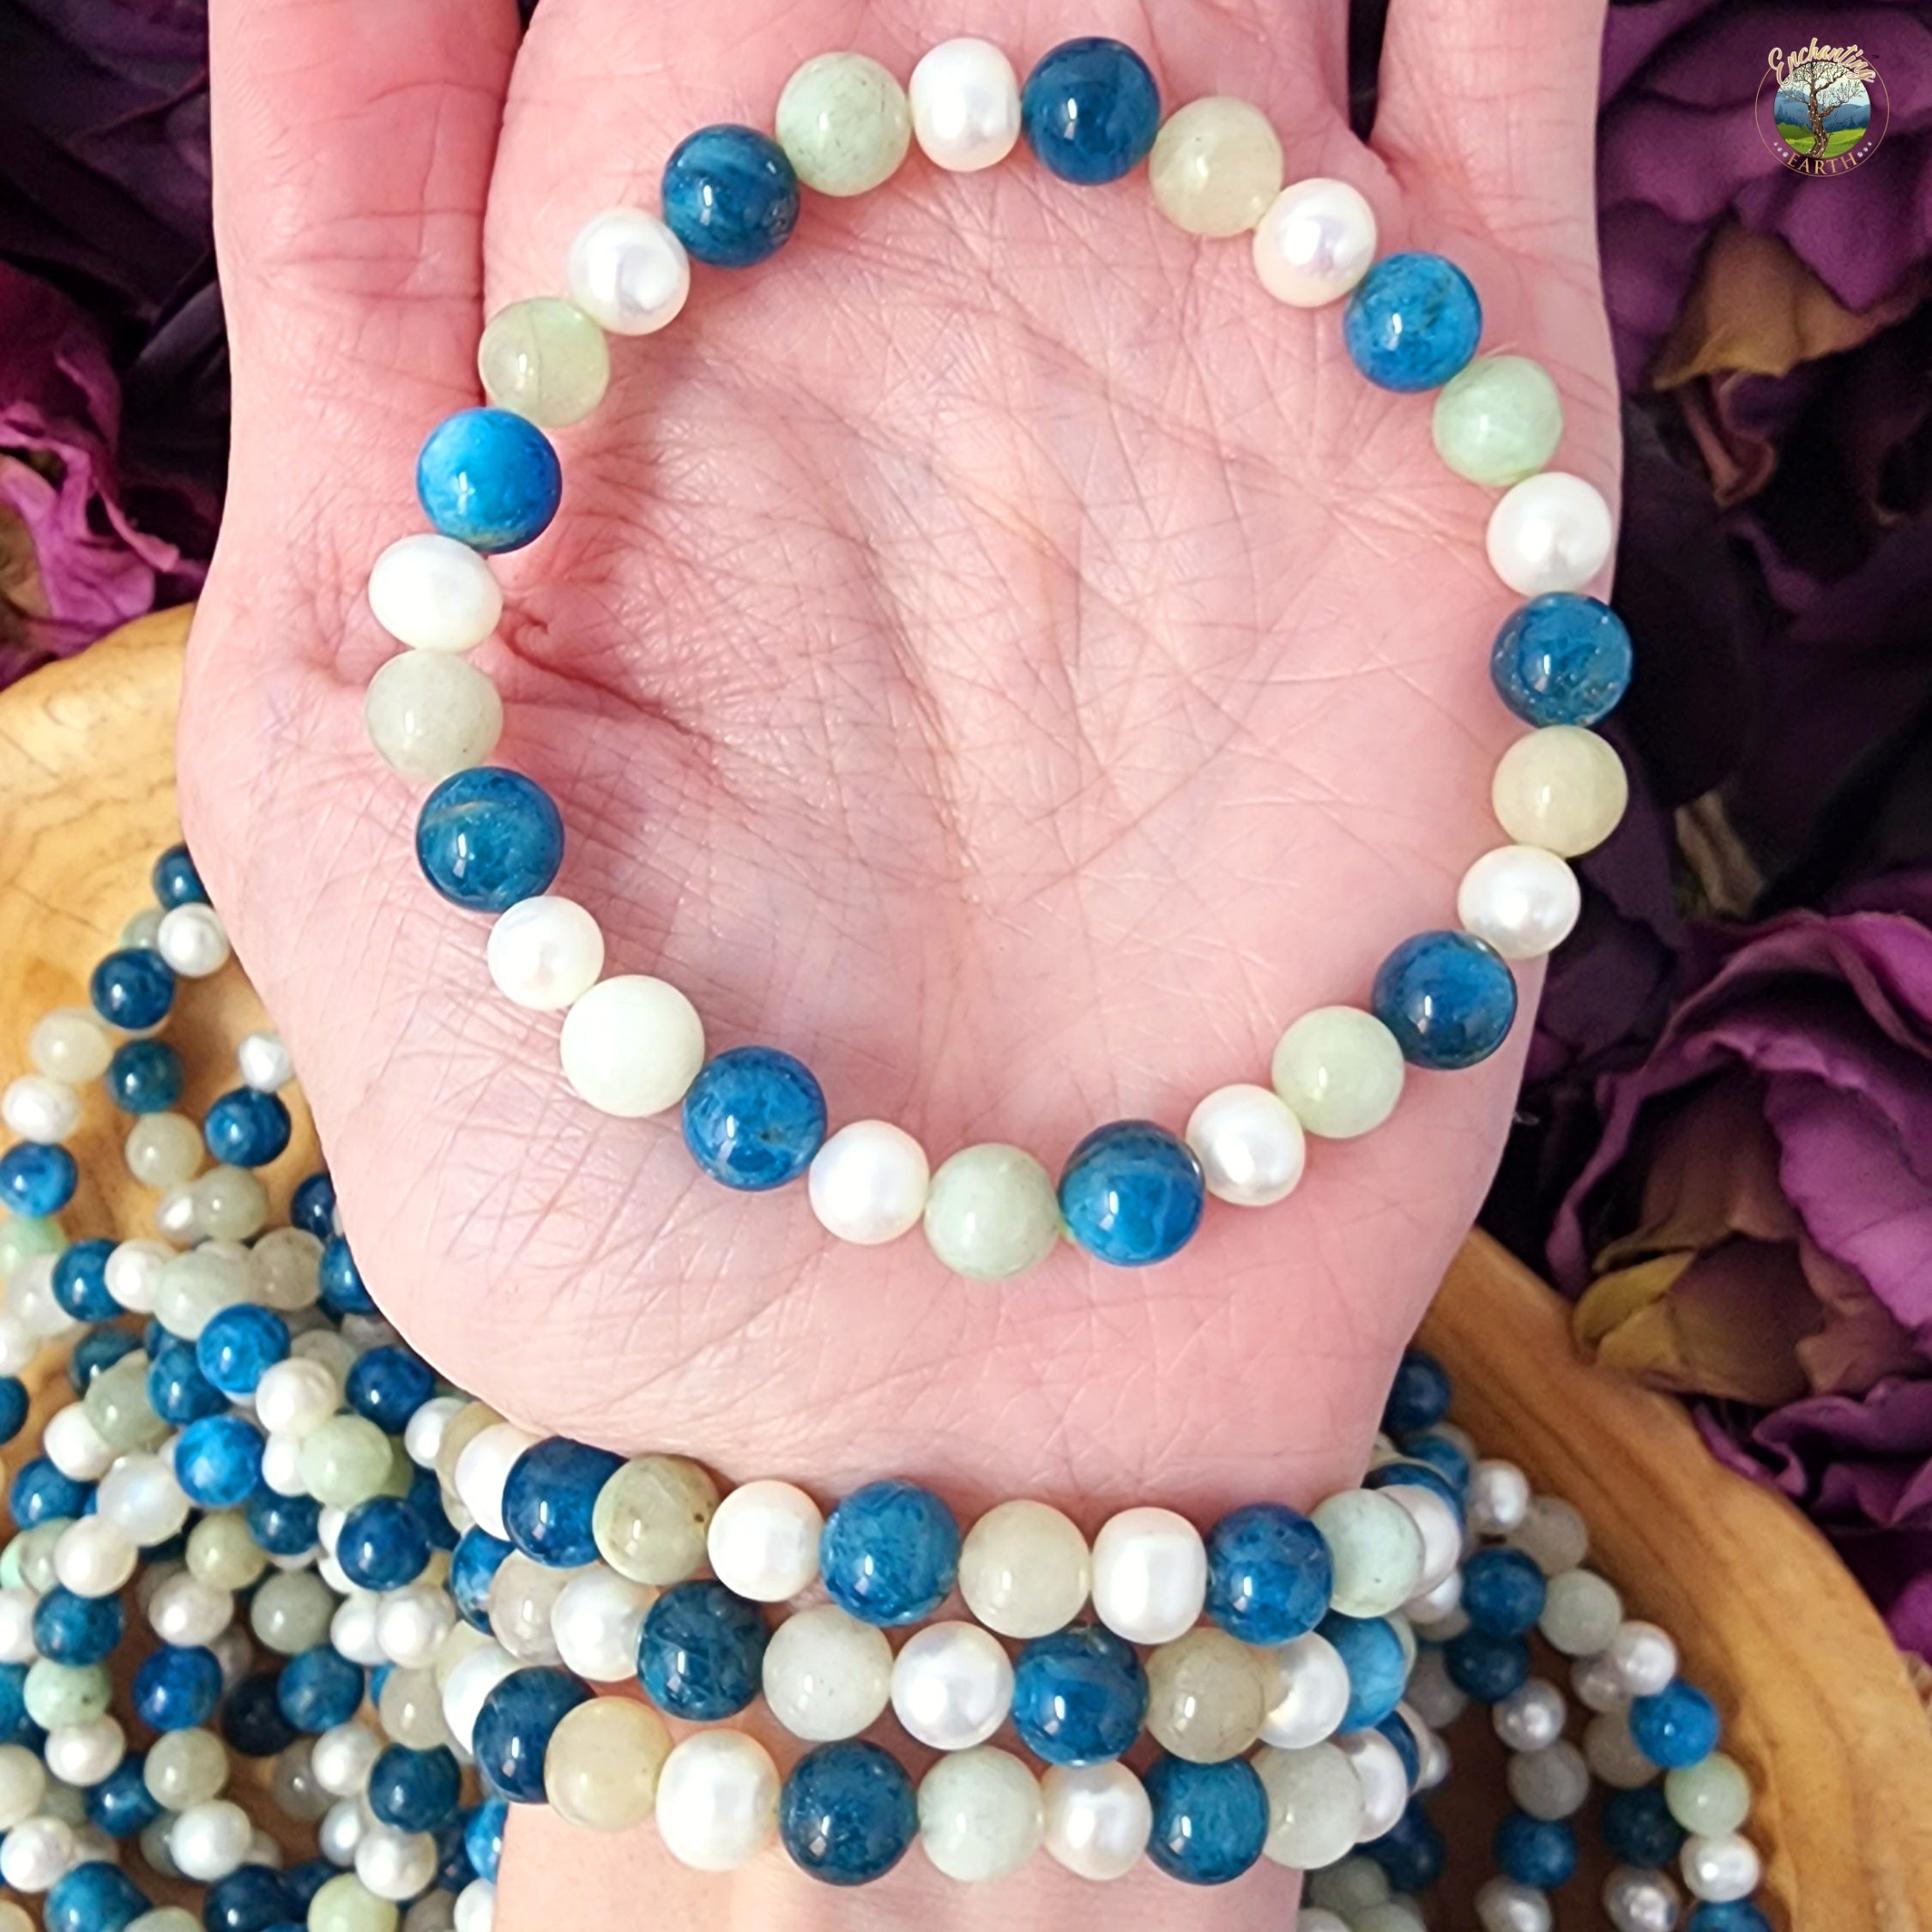 Gemini Bracelet (Blue Apatite, Green Moonstone & Pearl) *High Quality* for Empowerment and Strength